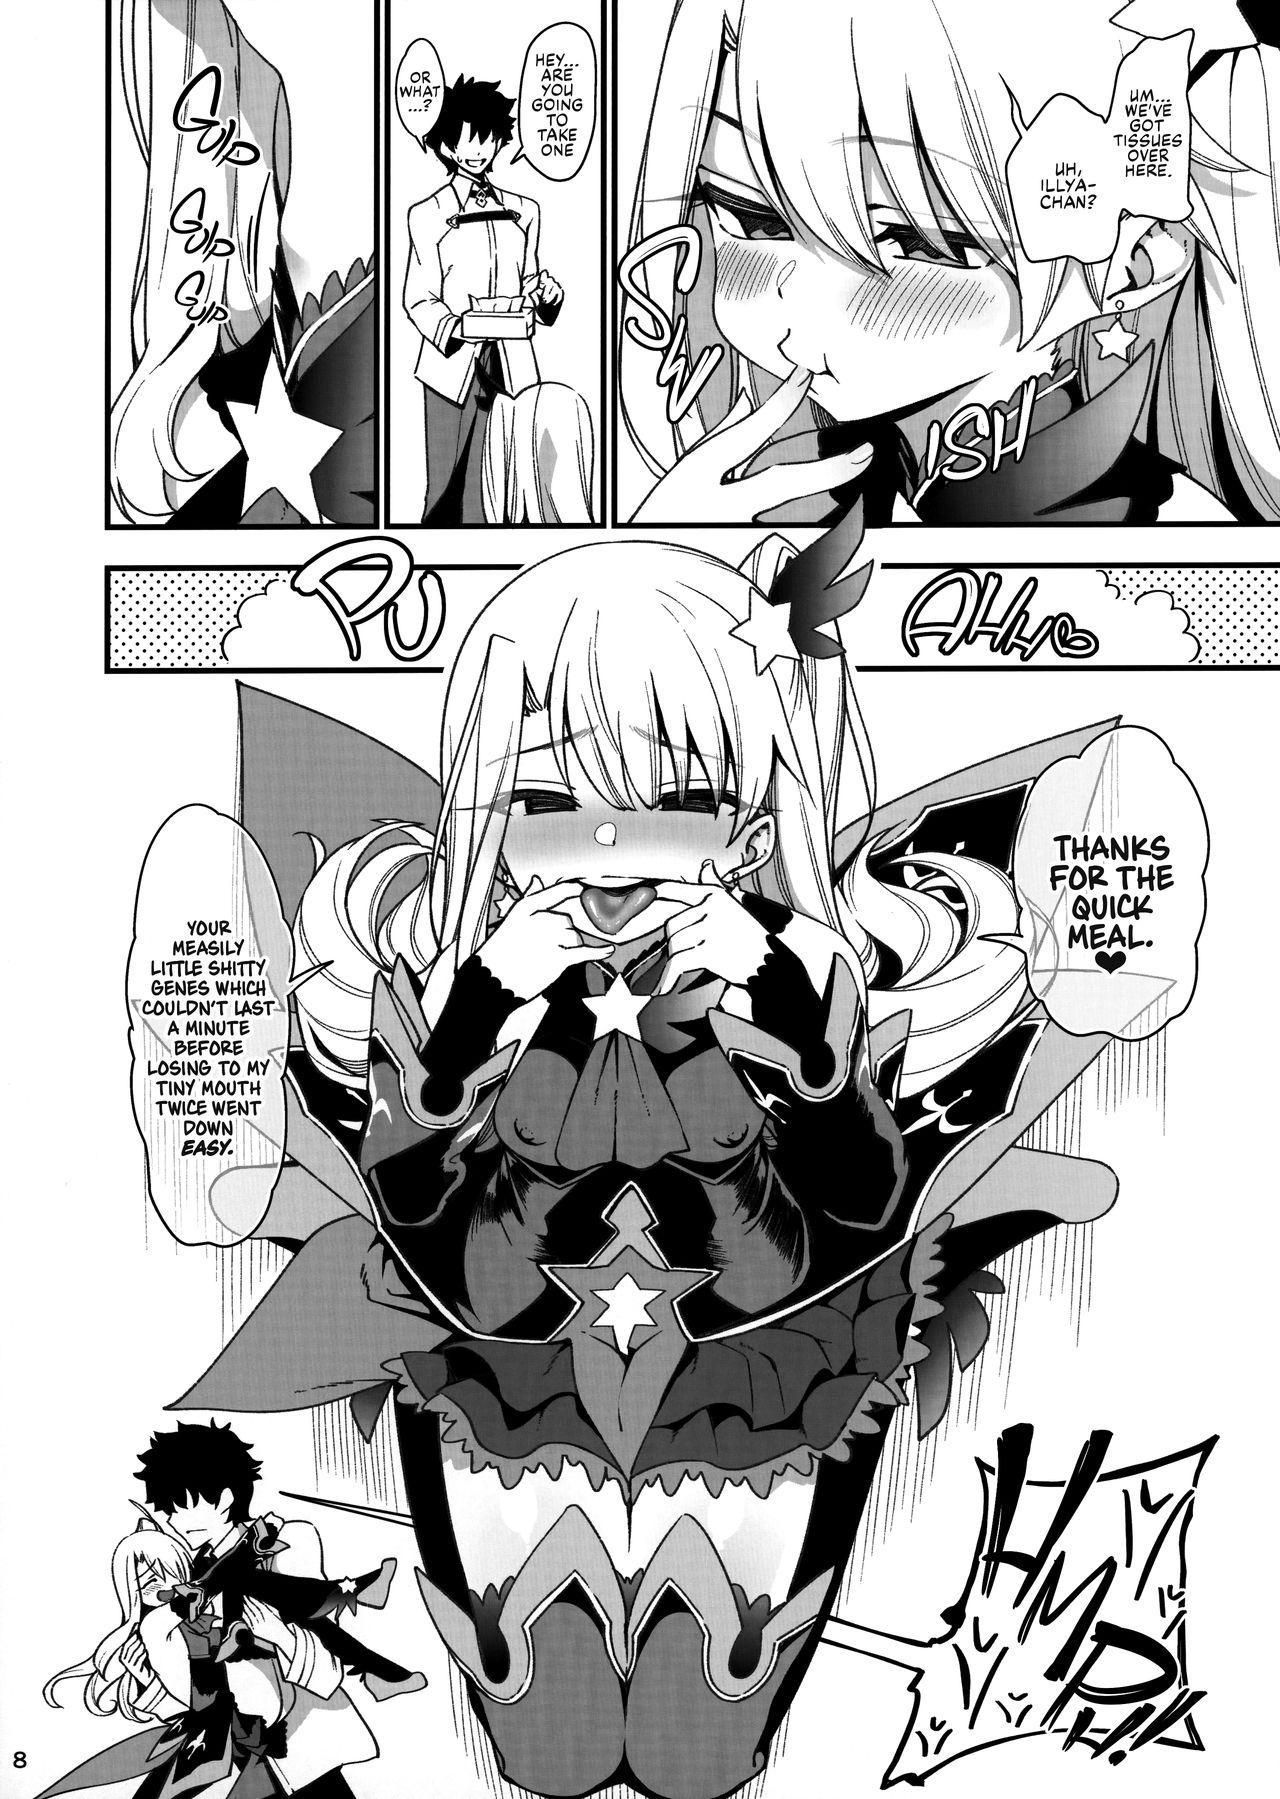 Asses Mesugaki Testament Form-chan o Wakarasetai | That Slutty Little Testament Form Brat! I Want to Teach Her a Lesson! - Fate grand order Fuck For Money - Page 9